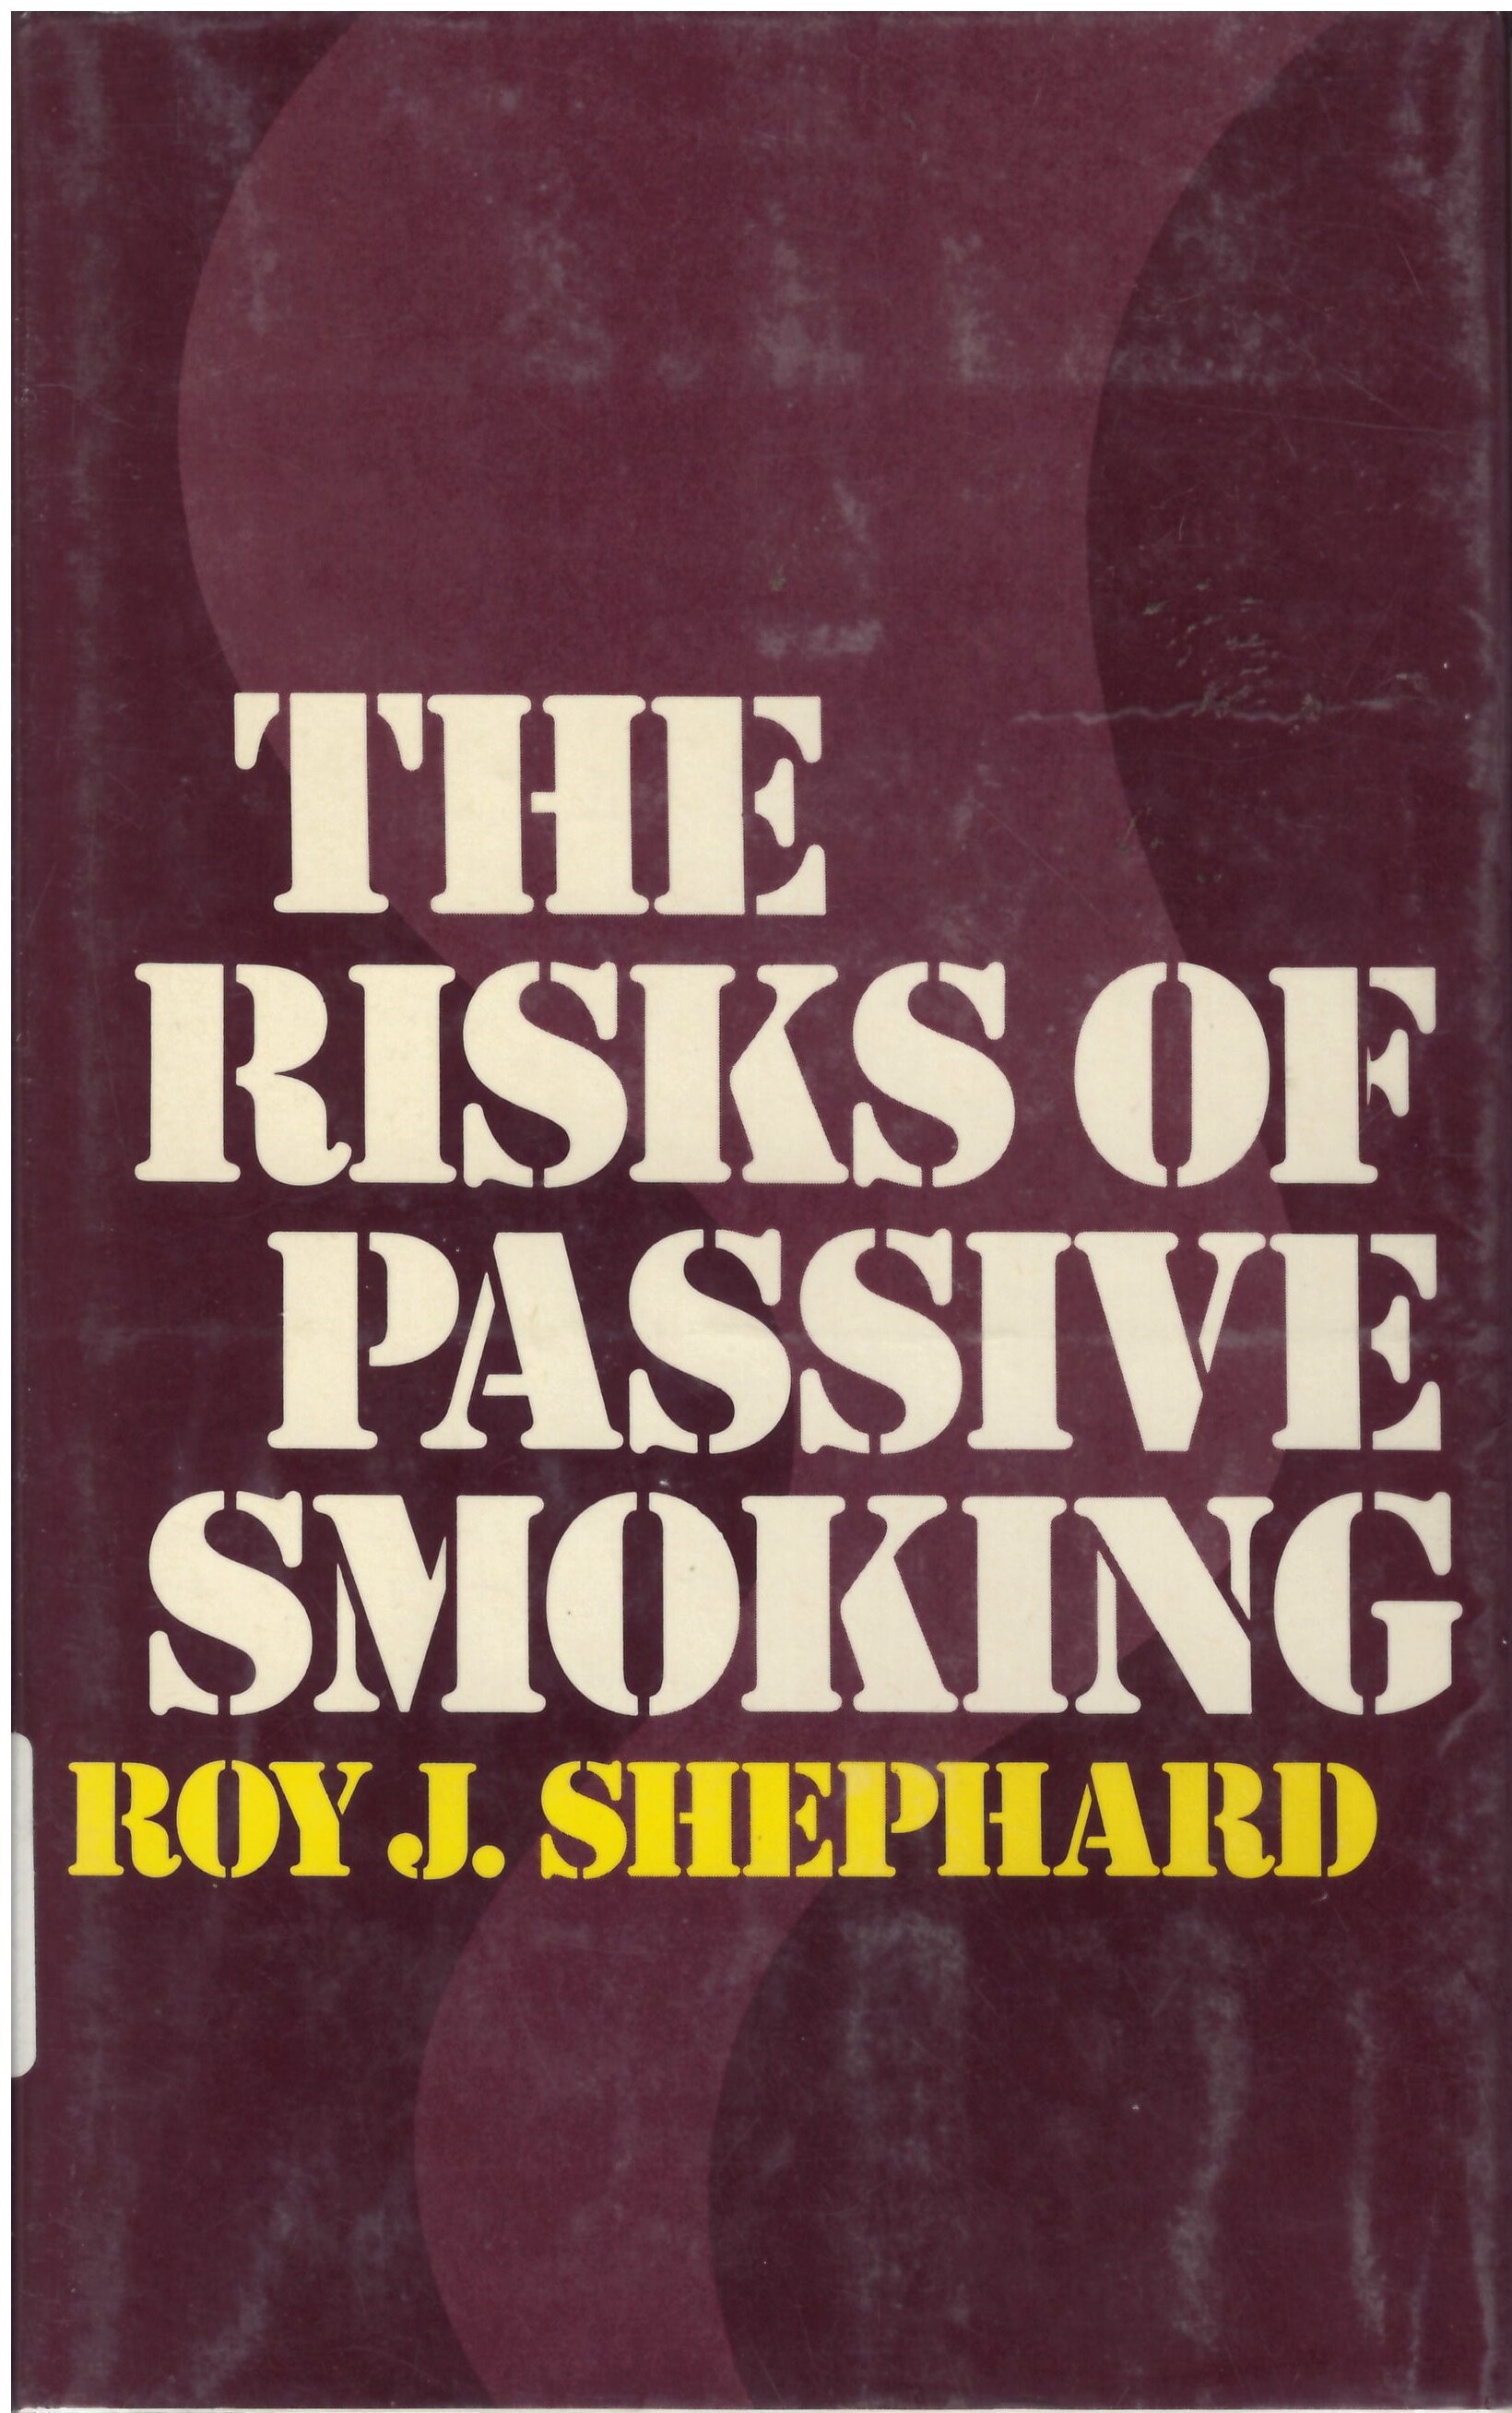 The risks of passive smoking